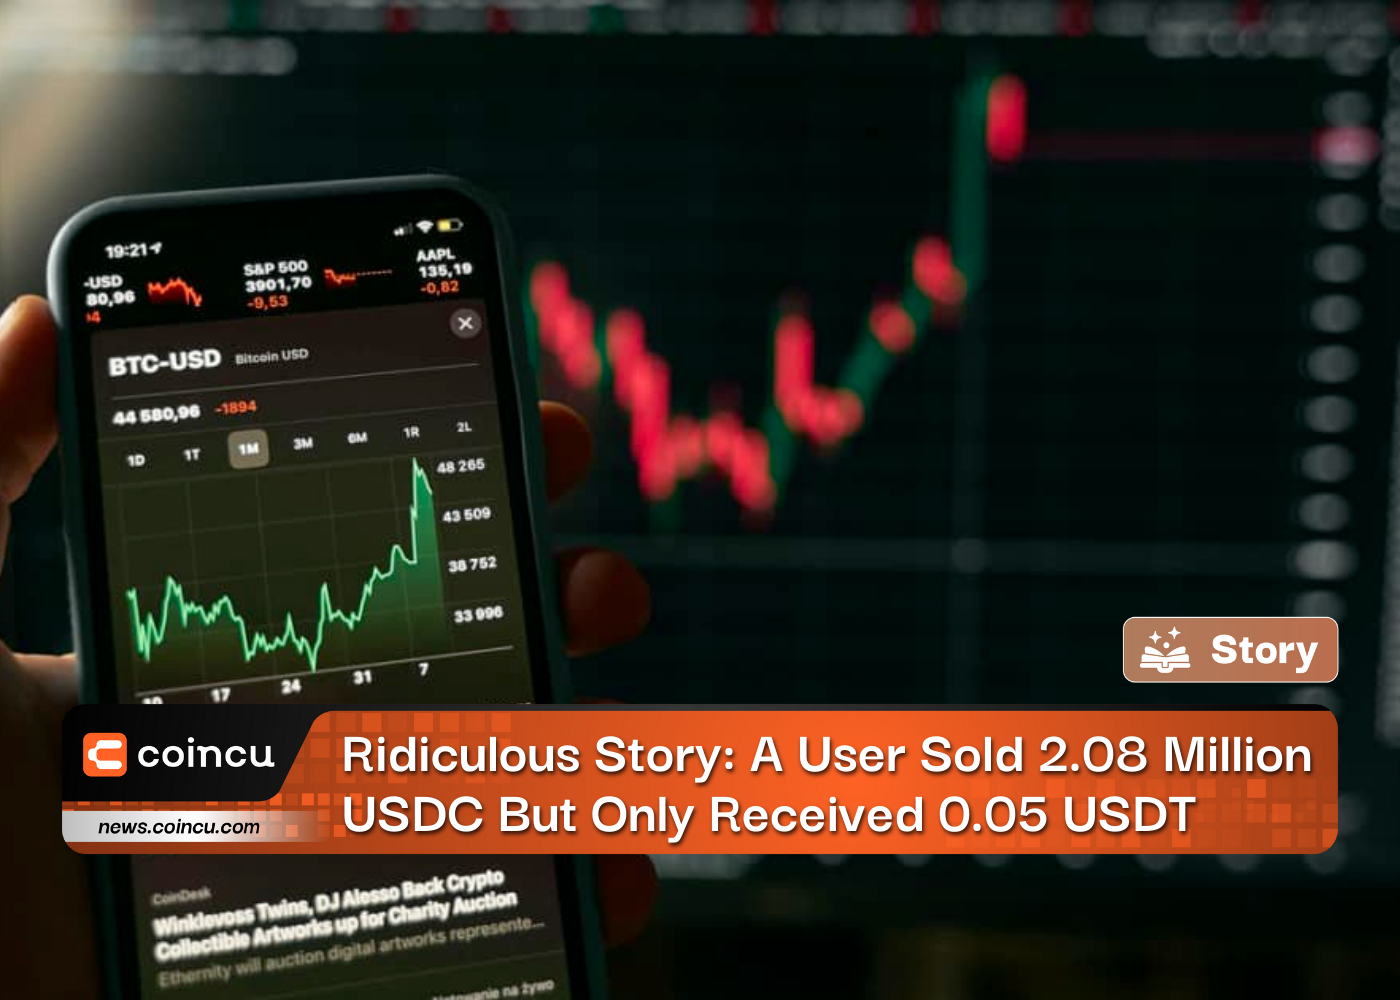 Ridiculous Story: A User Sold 2.08 Million USDC But Only Received 0.05 USDT